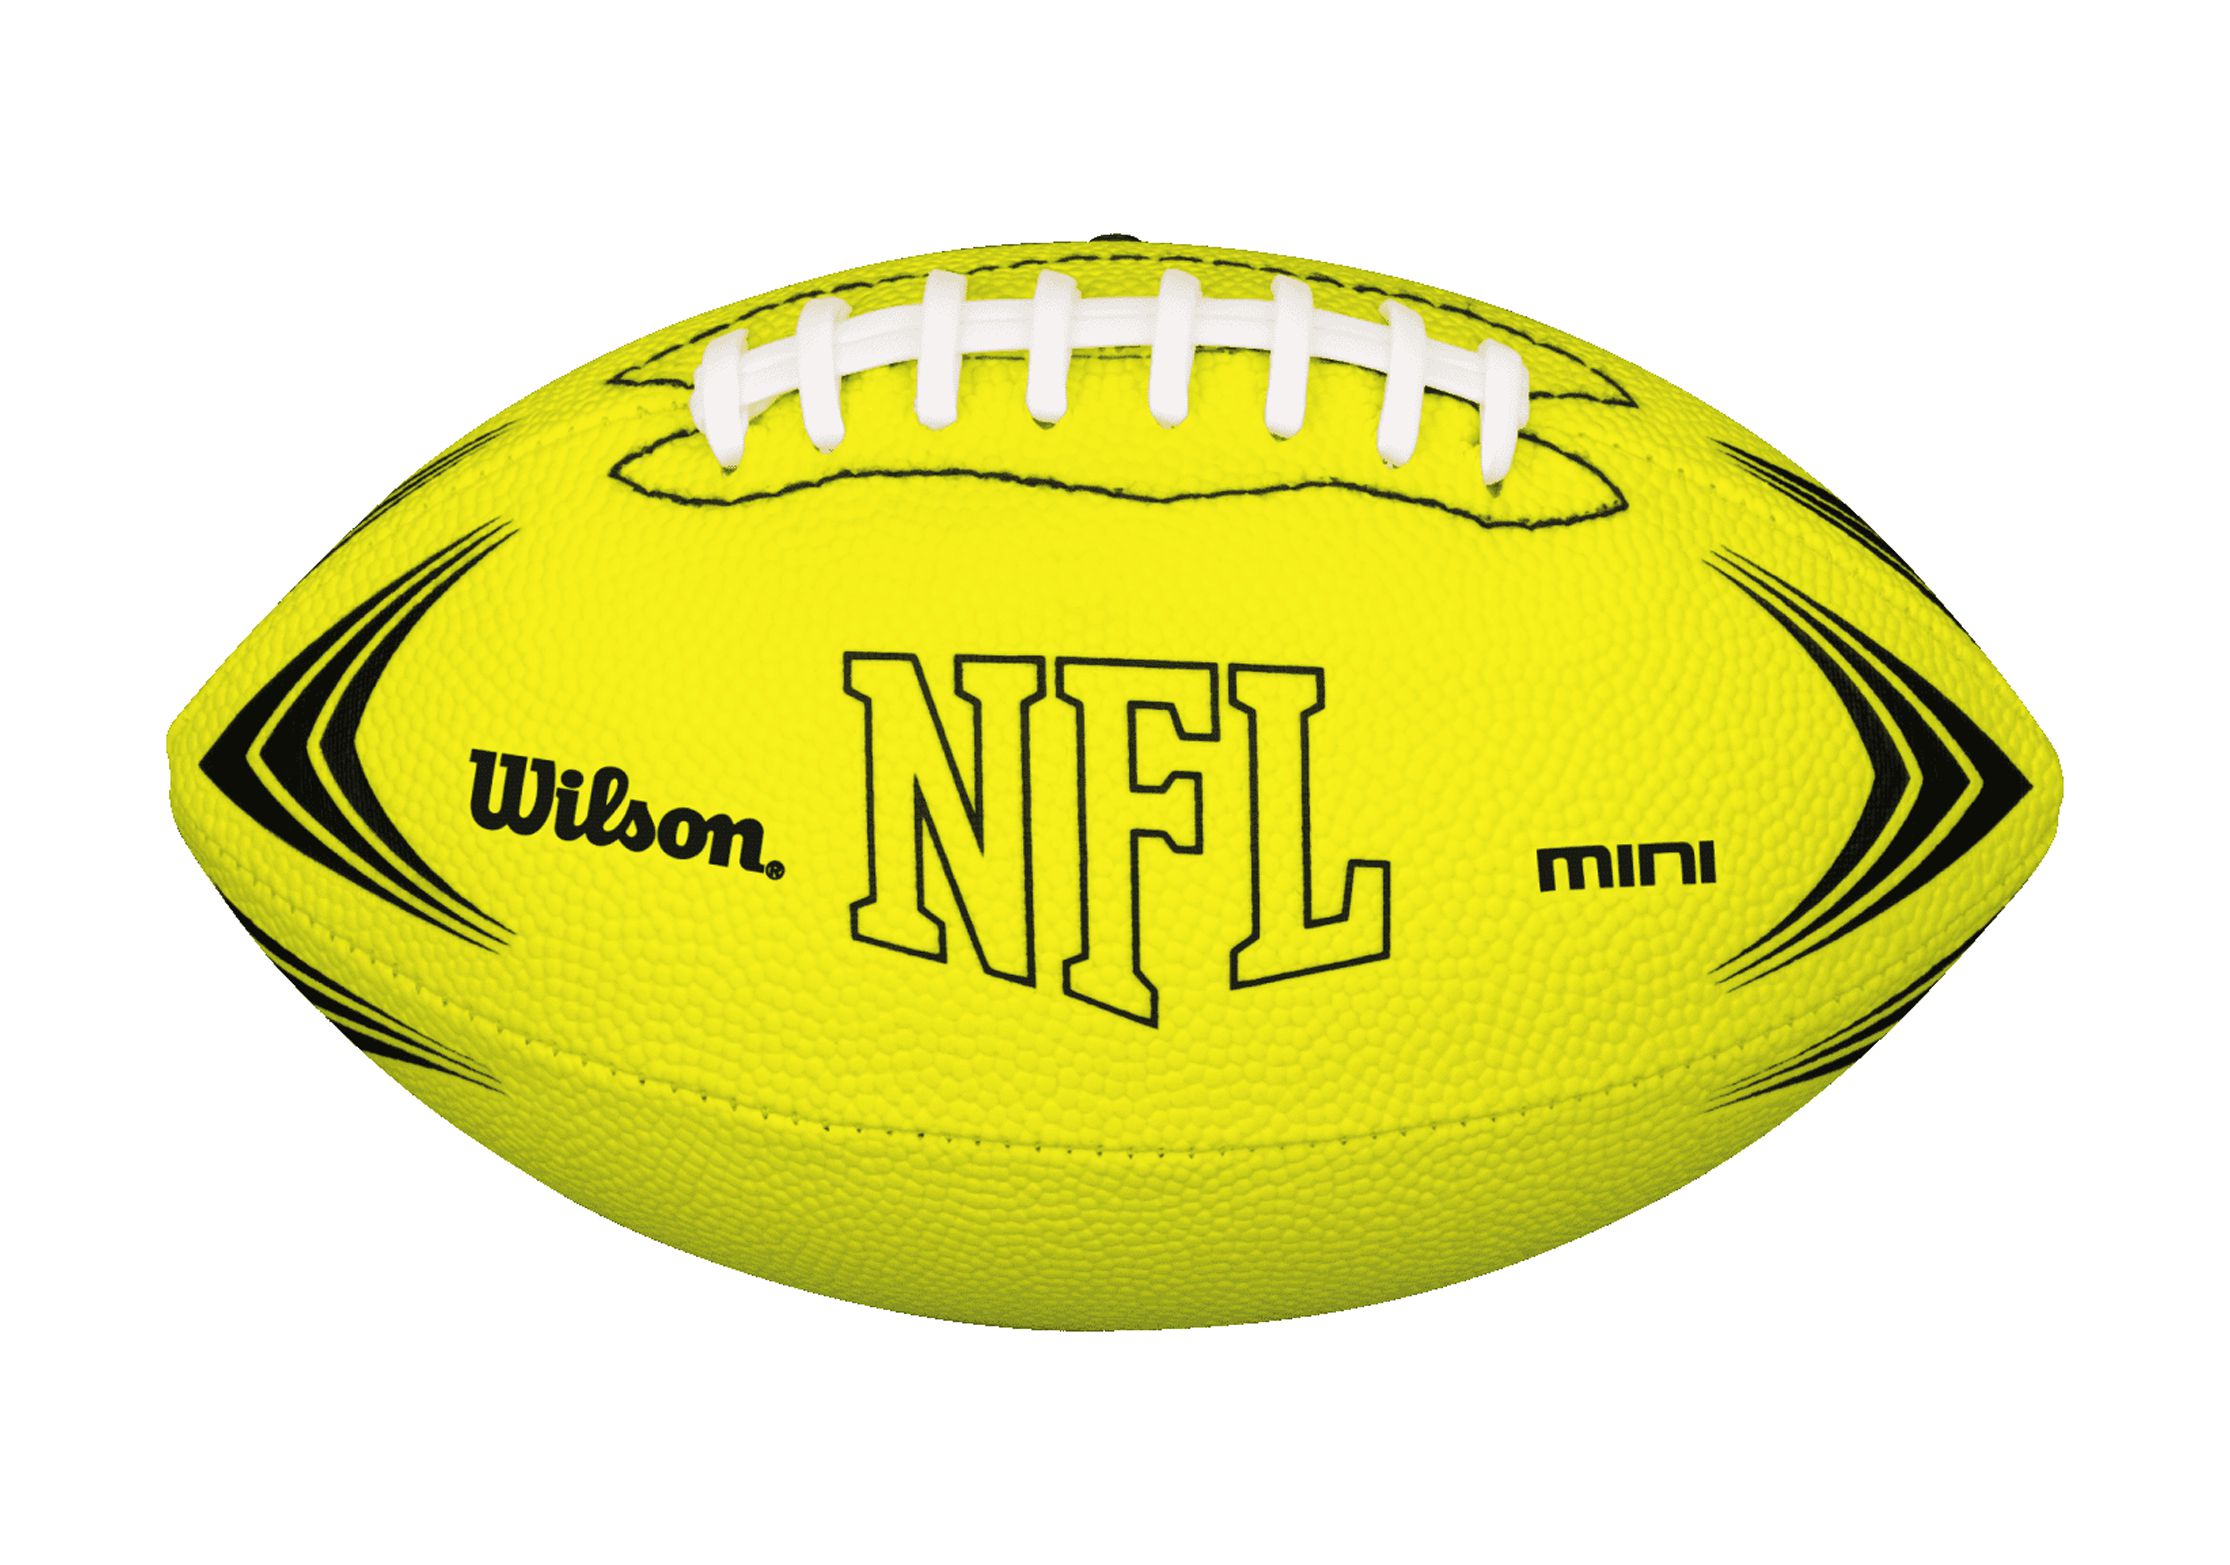 Wilson Sporting Goods NFL Mini Rubber Youth Football, Yellow - image 2 of 4